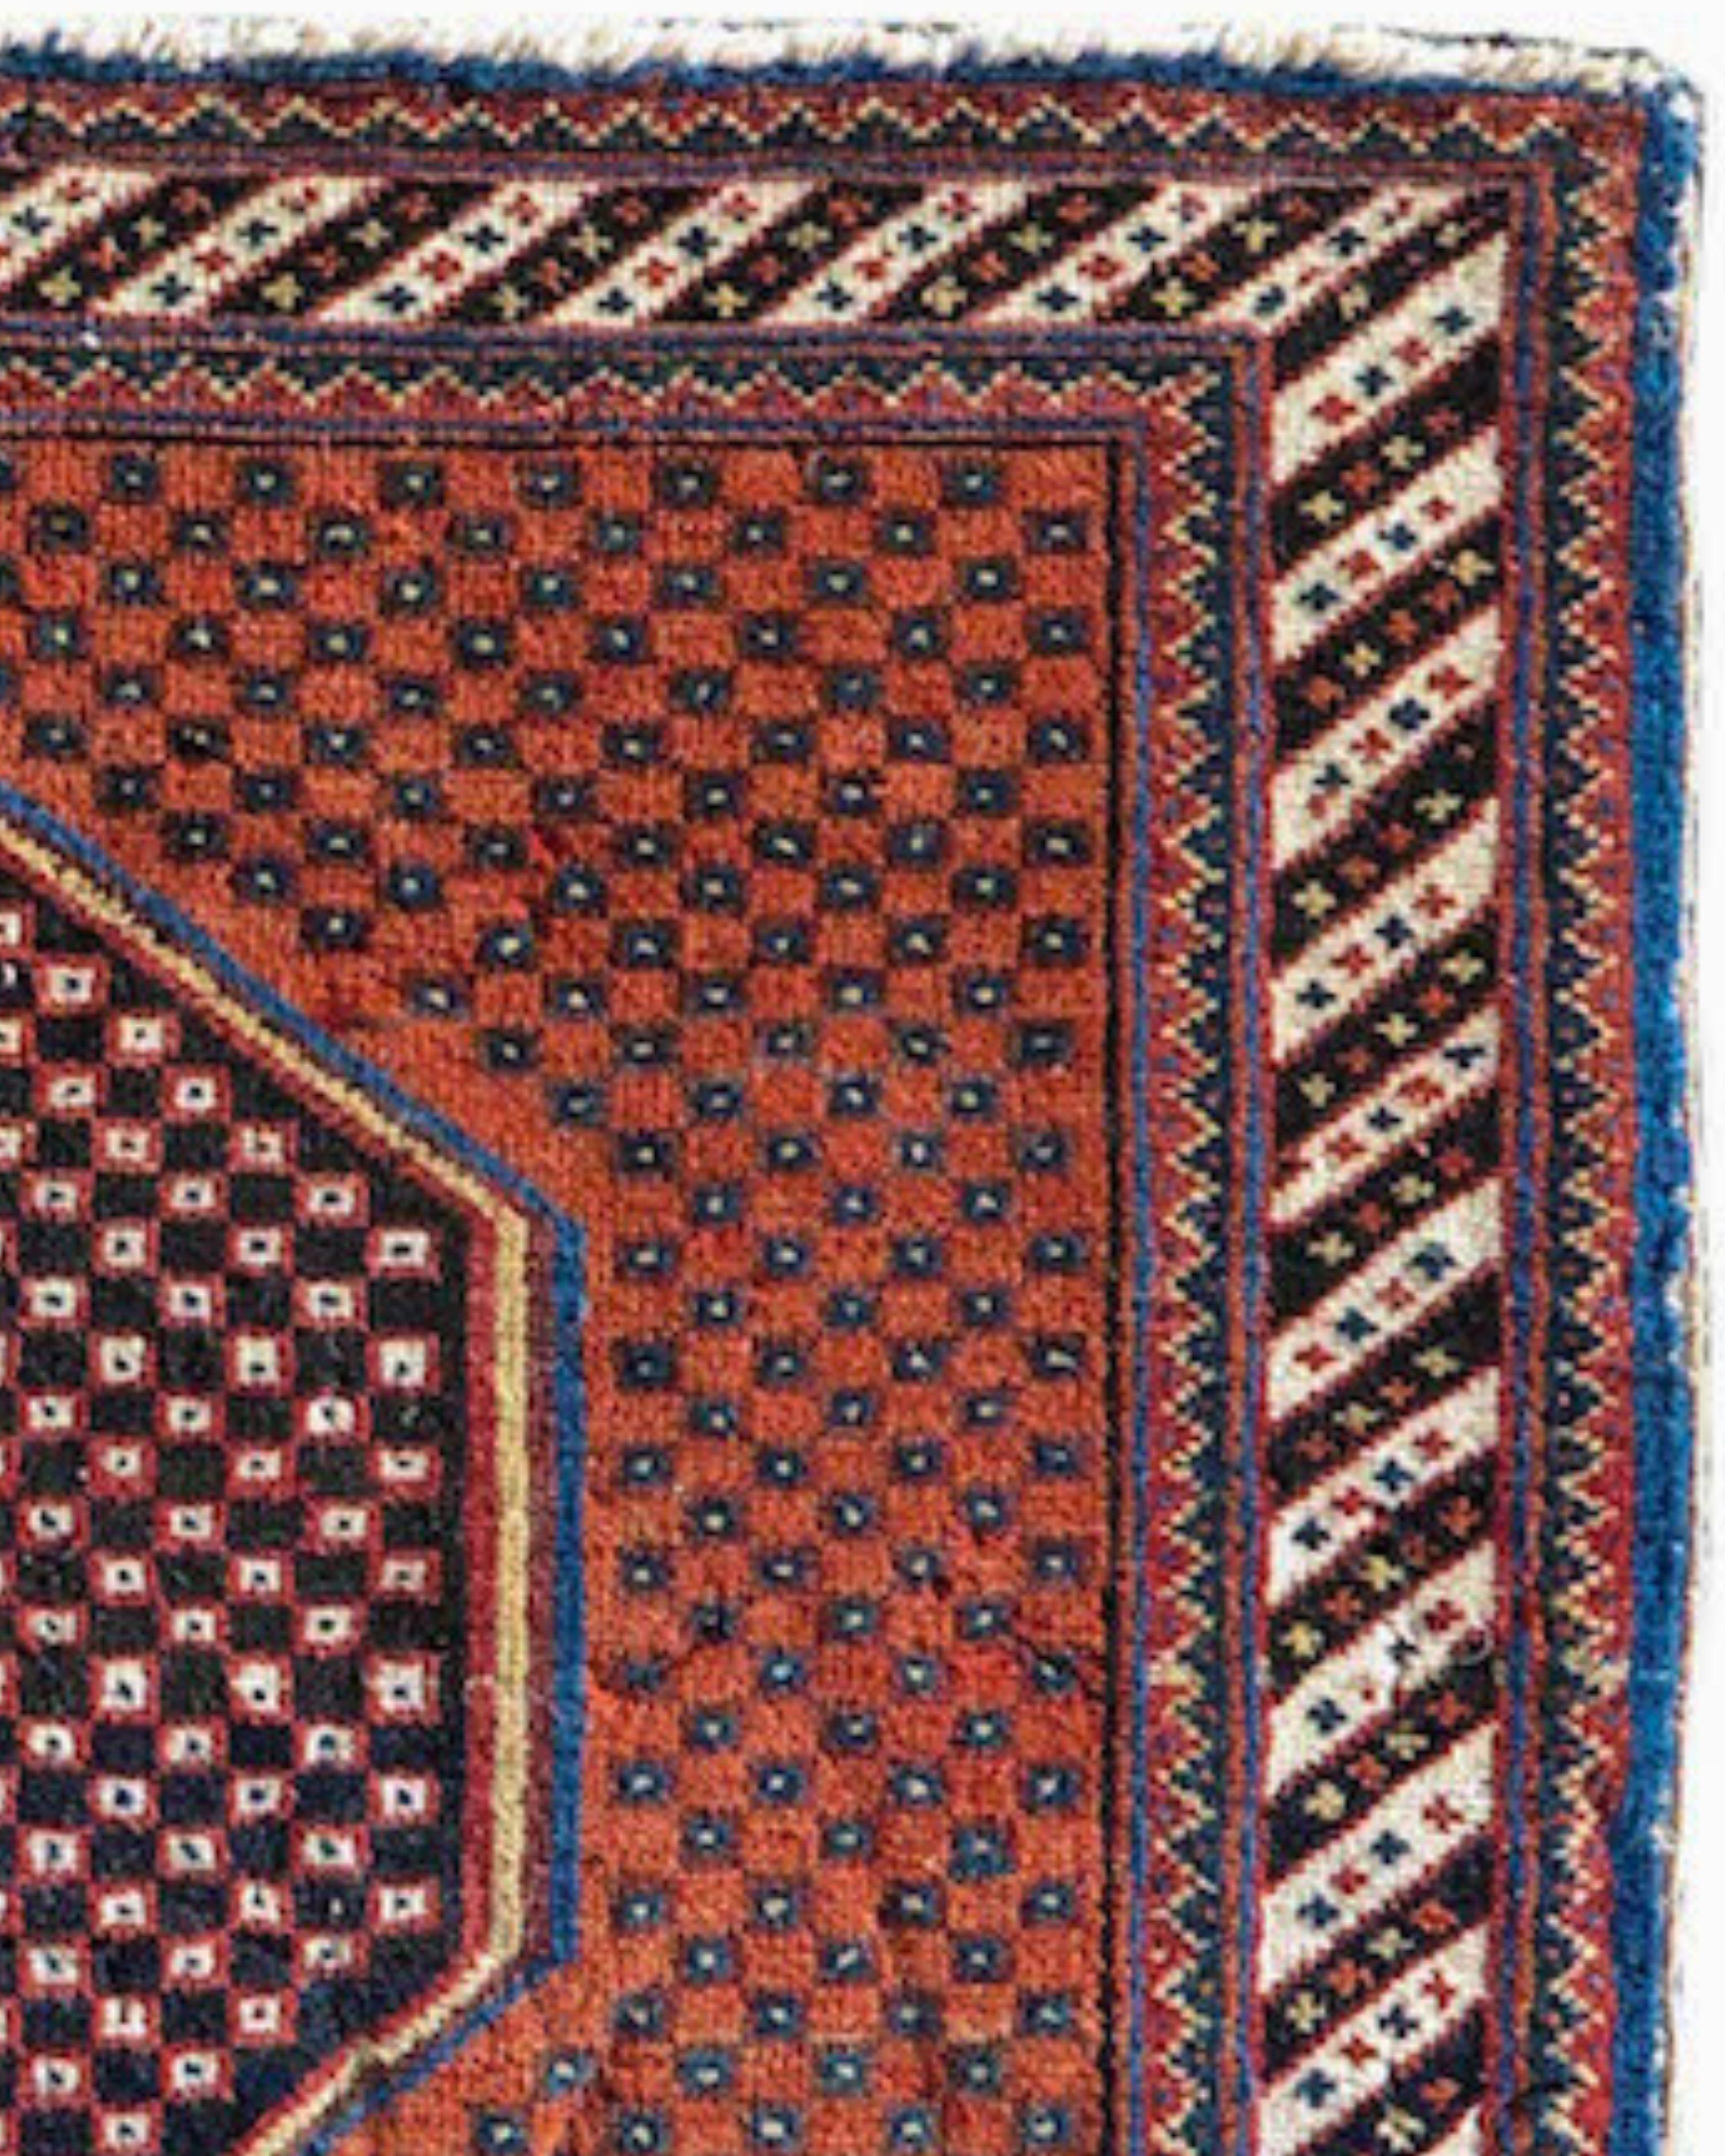 Hand-Knotted Antique Persian Afshar Bagface, c. 1900 For Sale